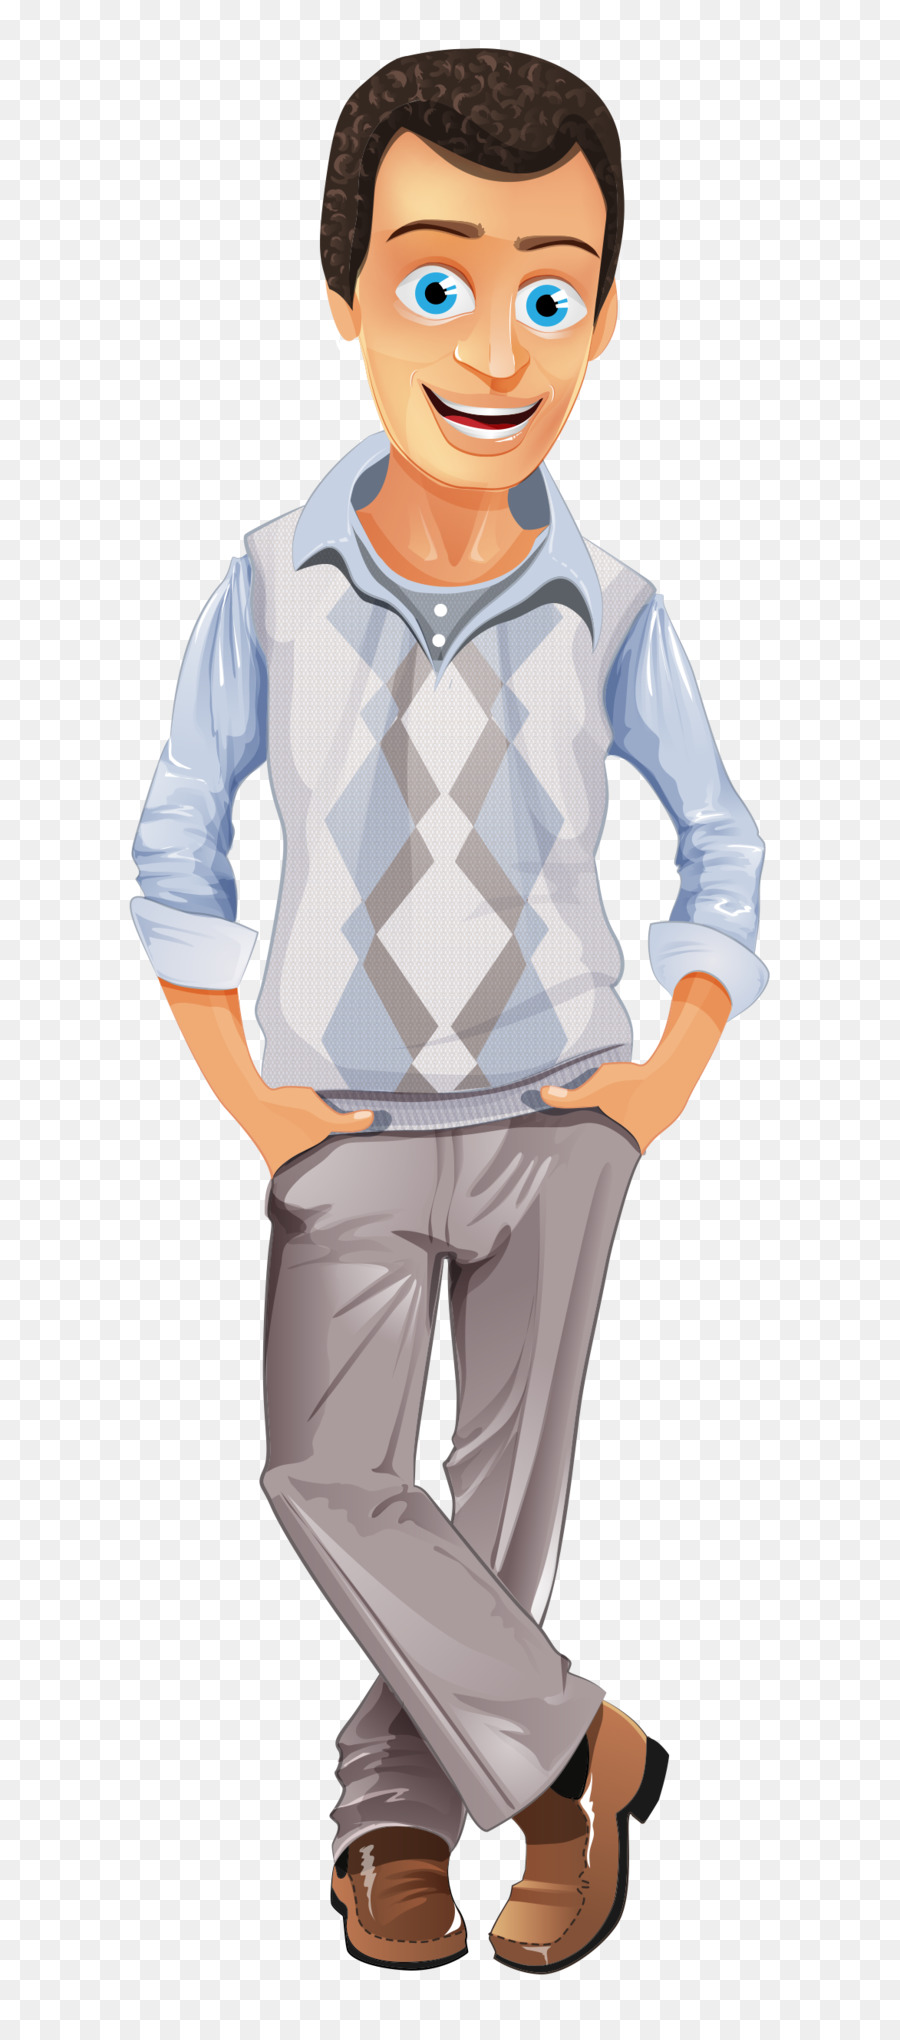 Business Casual Casual Friday Clip Art